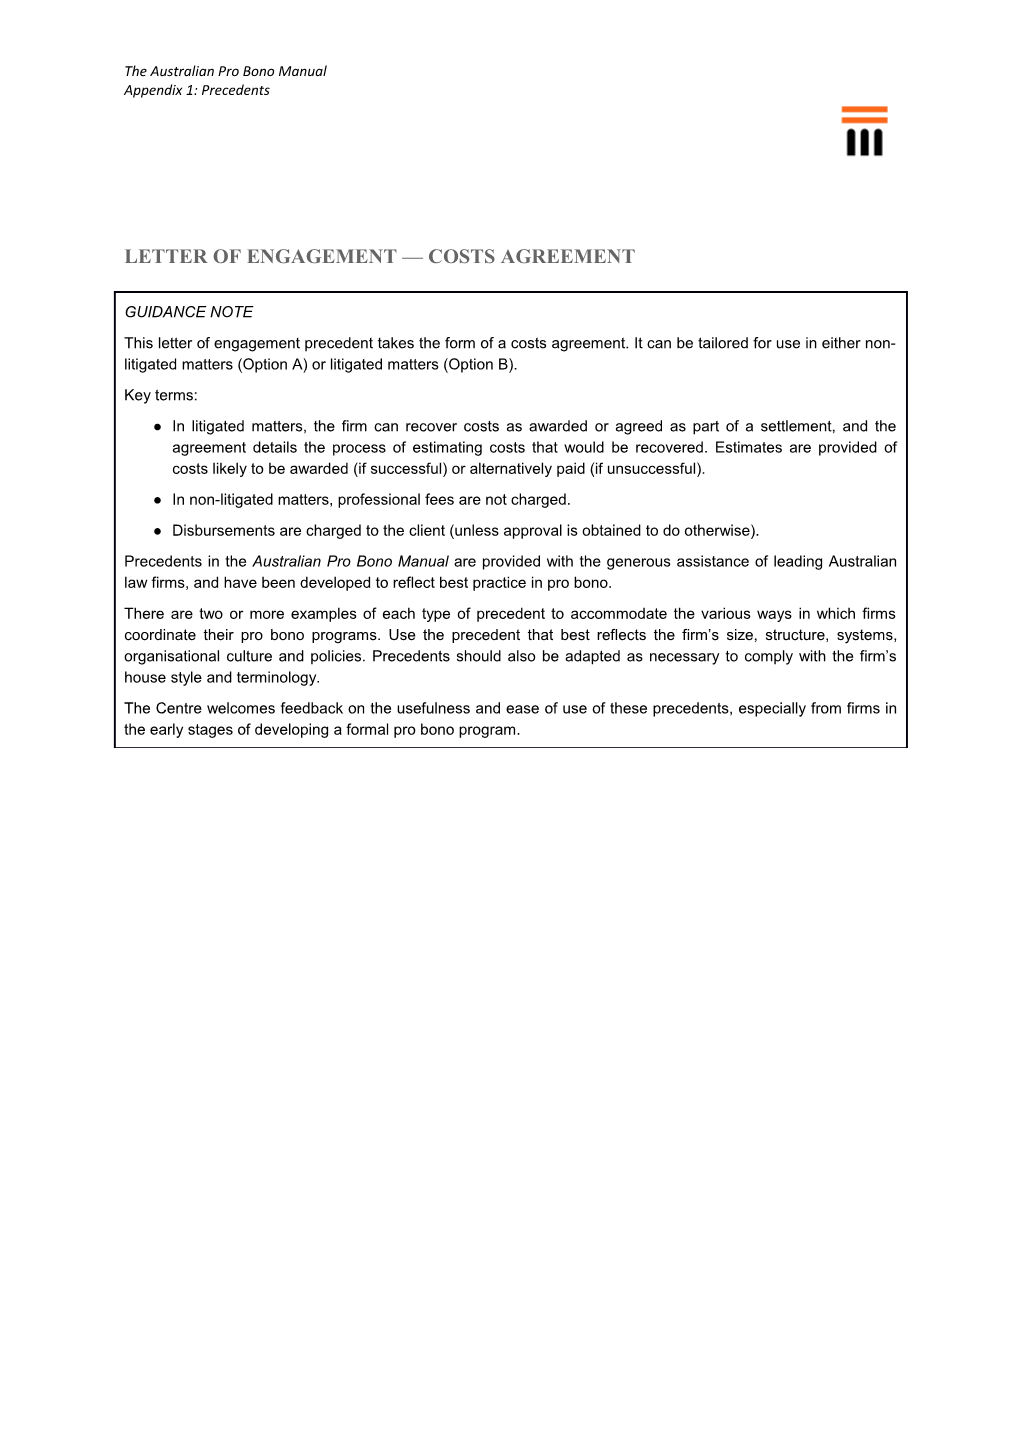 Letter of Engagement Costs Agreement